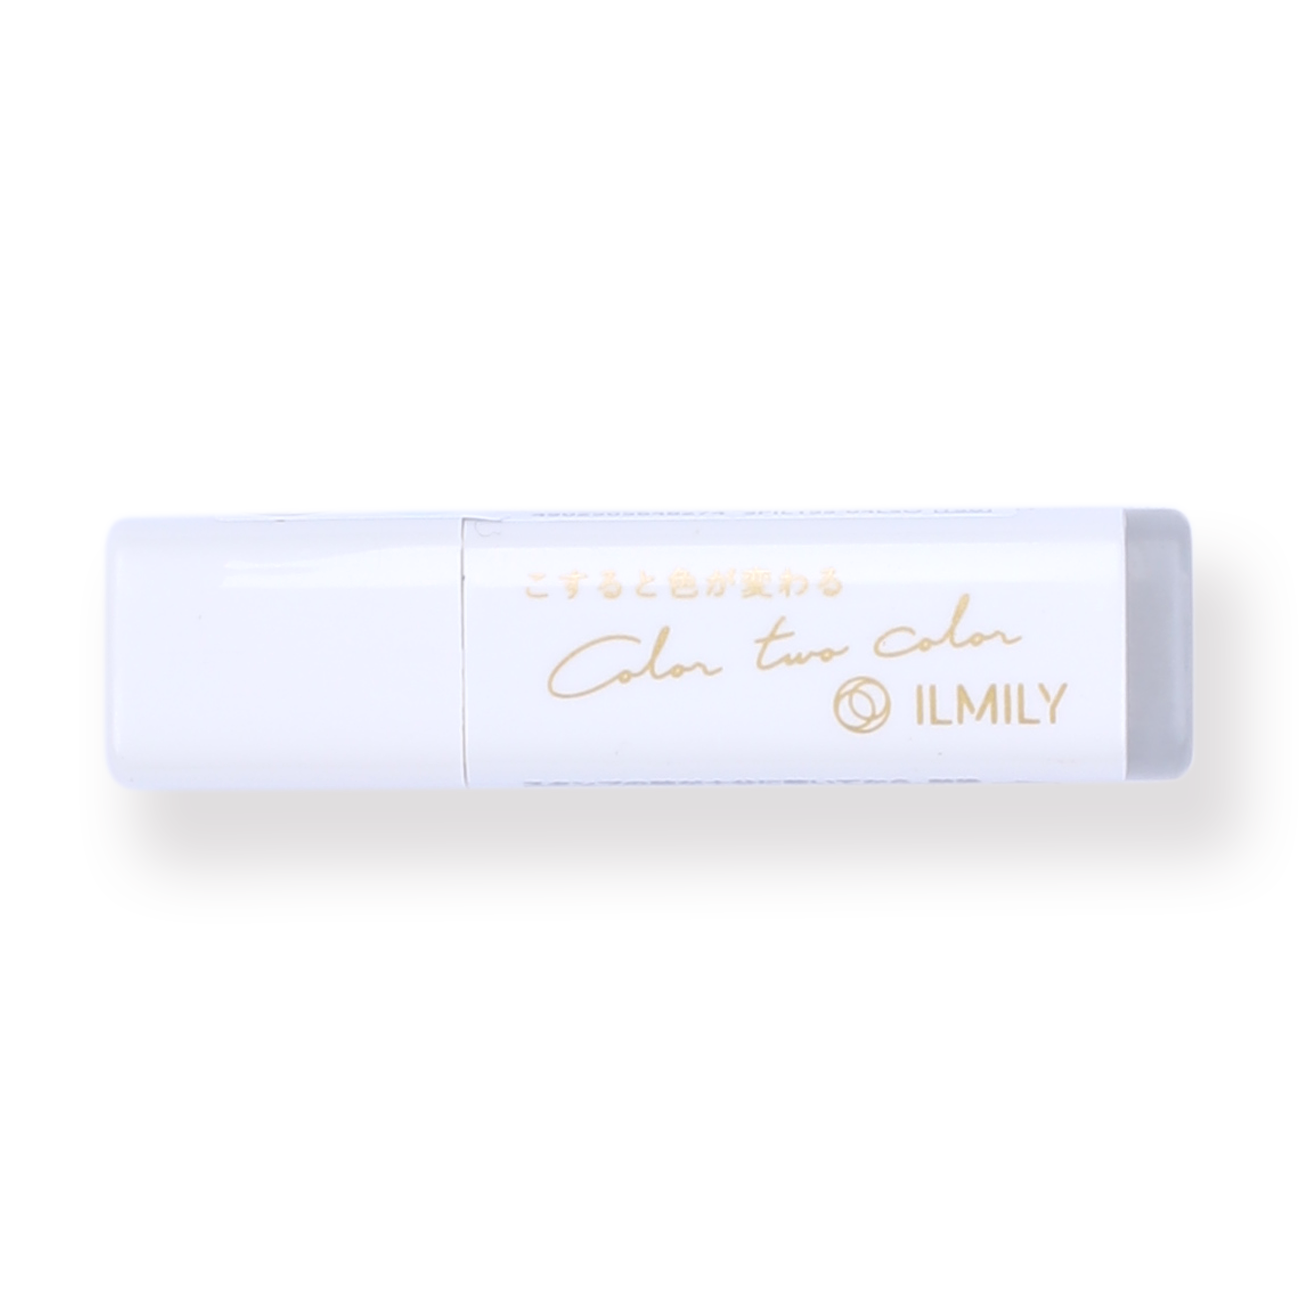 Pilot ILMILY Limited Edition Erasable Stamp - Location